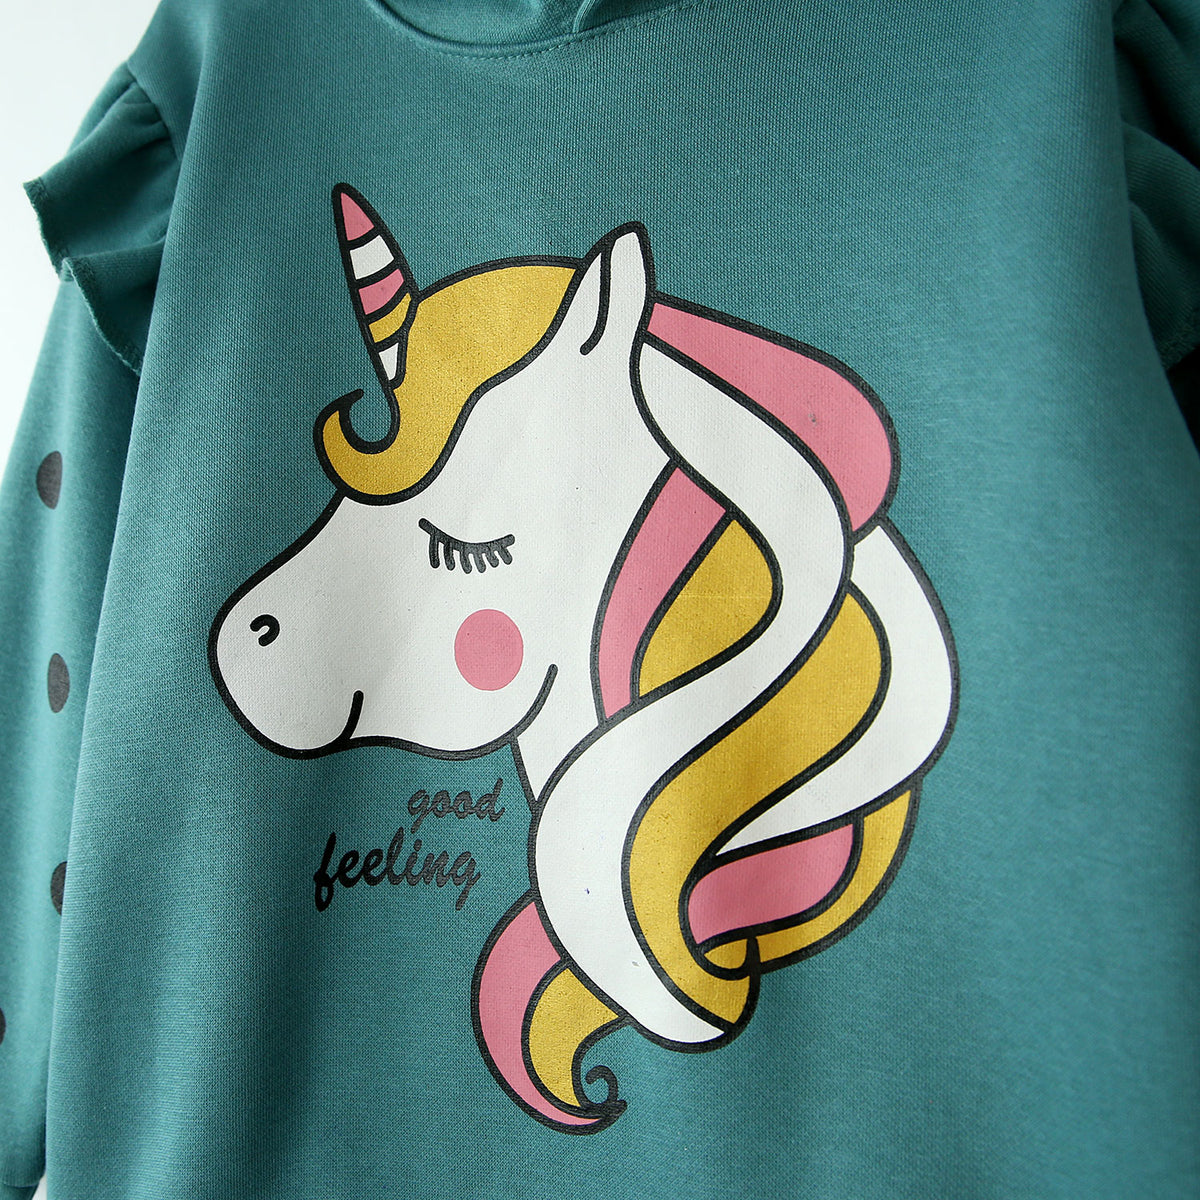 Premium Quality Pull-Over Graphic Fleece Frill Hoodie For Girls